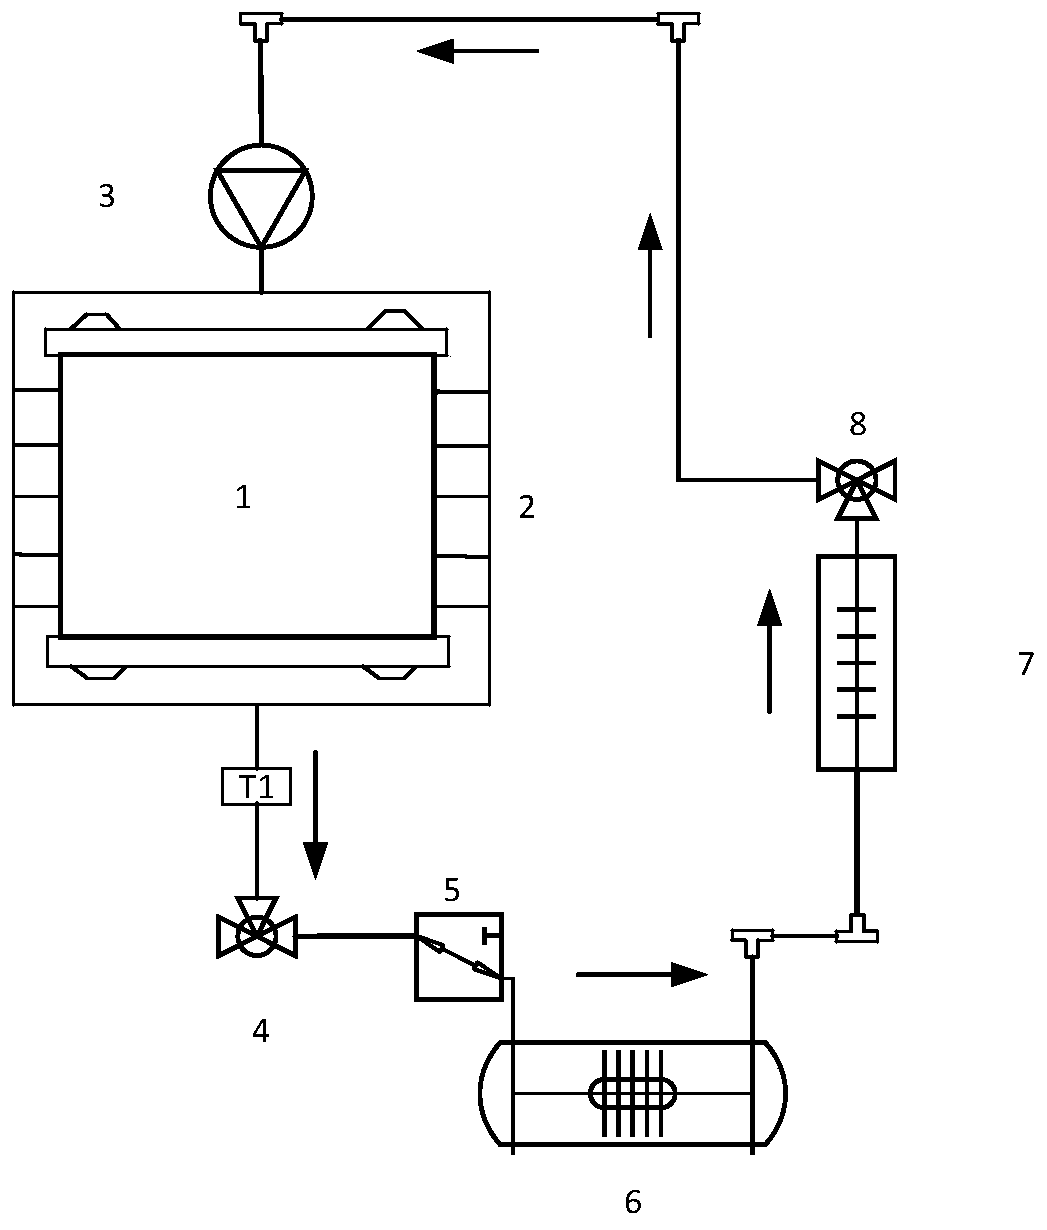 Fuel cell thermal management system with phase change heat storage and preheating functions